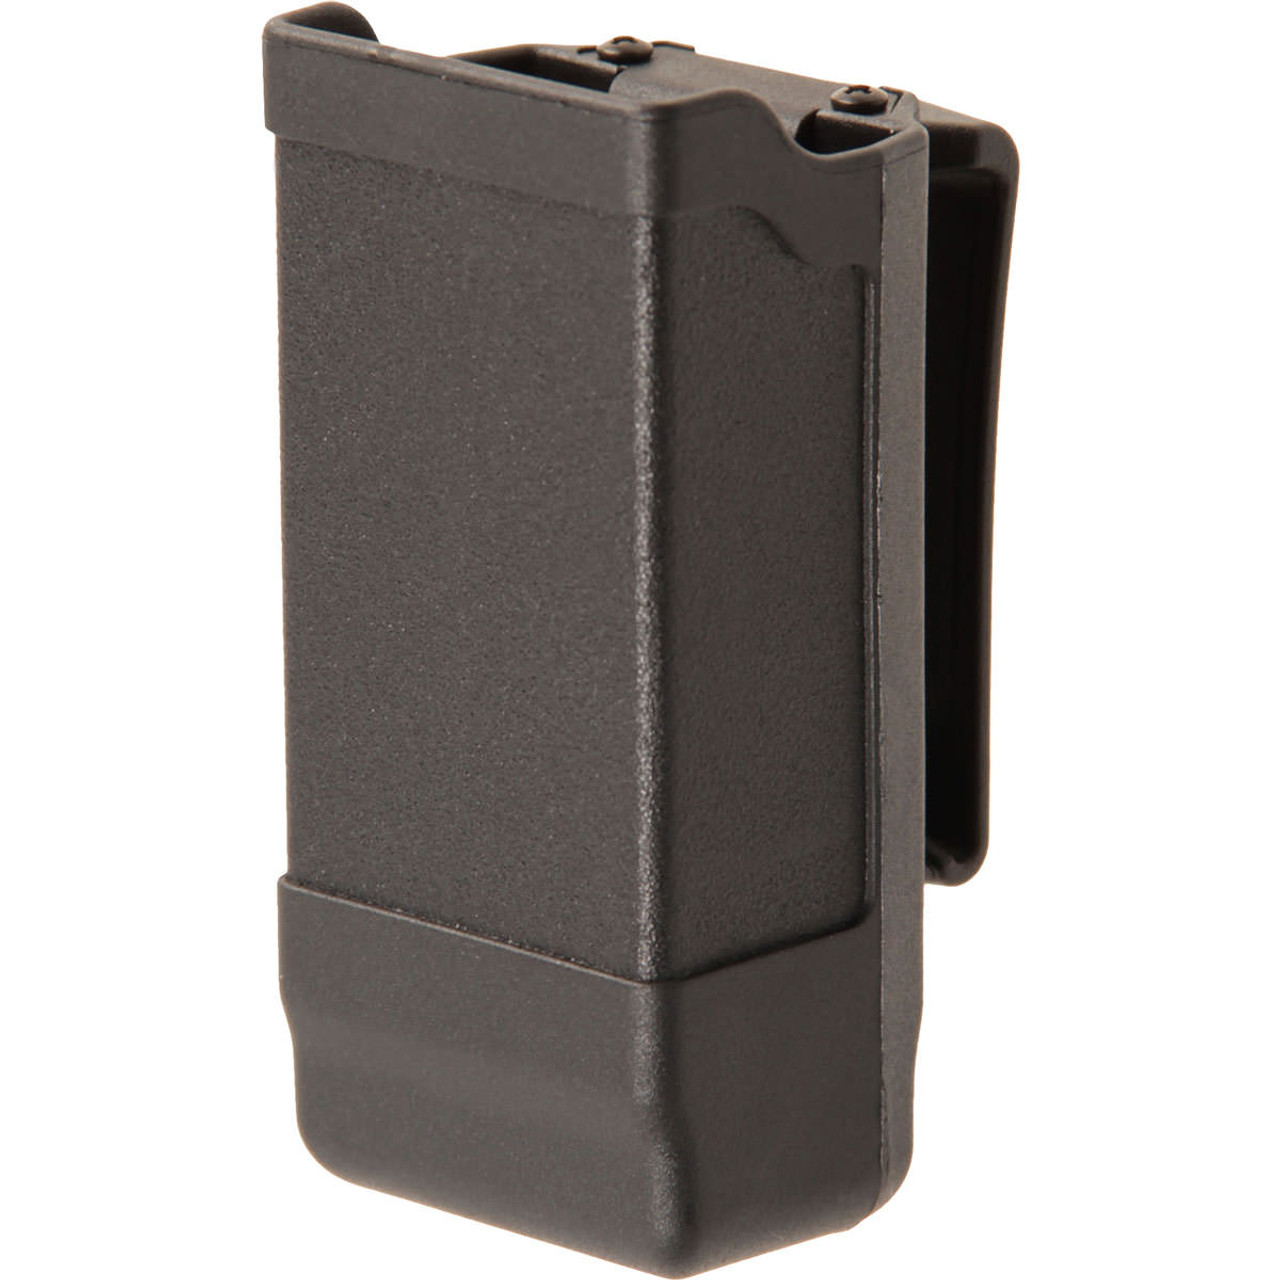 New BLACKHAWK QDCC1318 Mgazine Holder.40cal .45cal/9mm Double Stack 